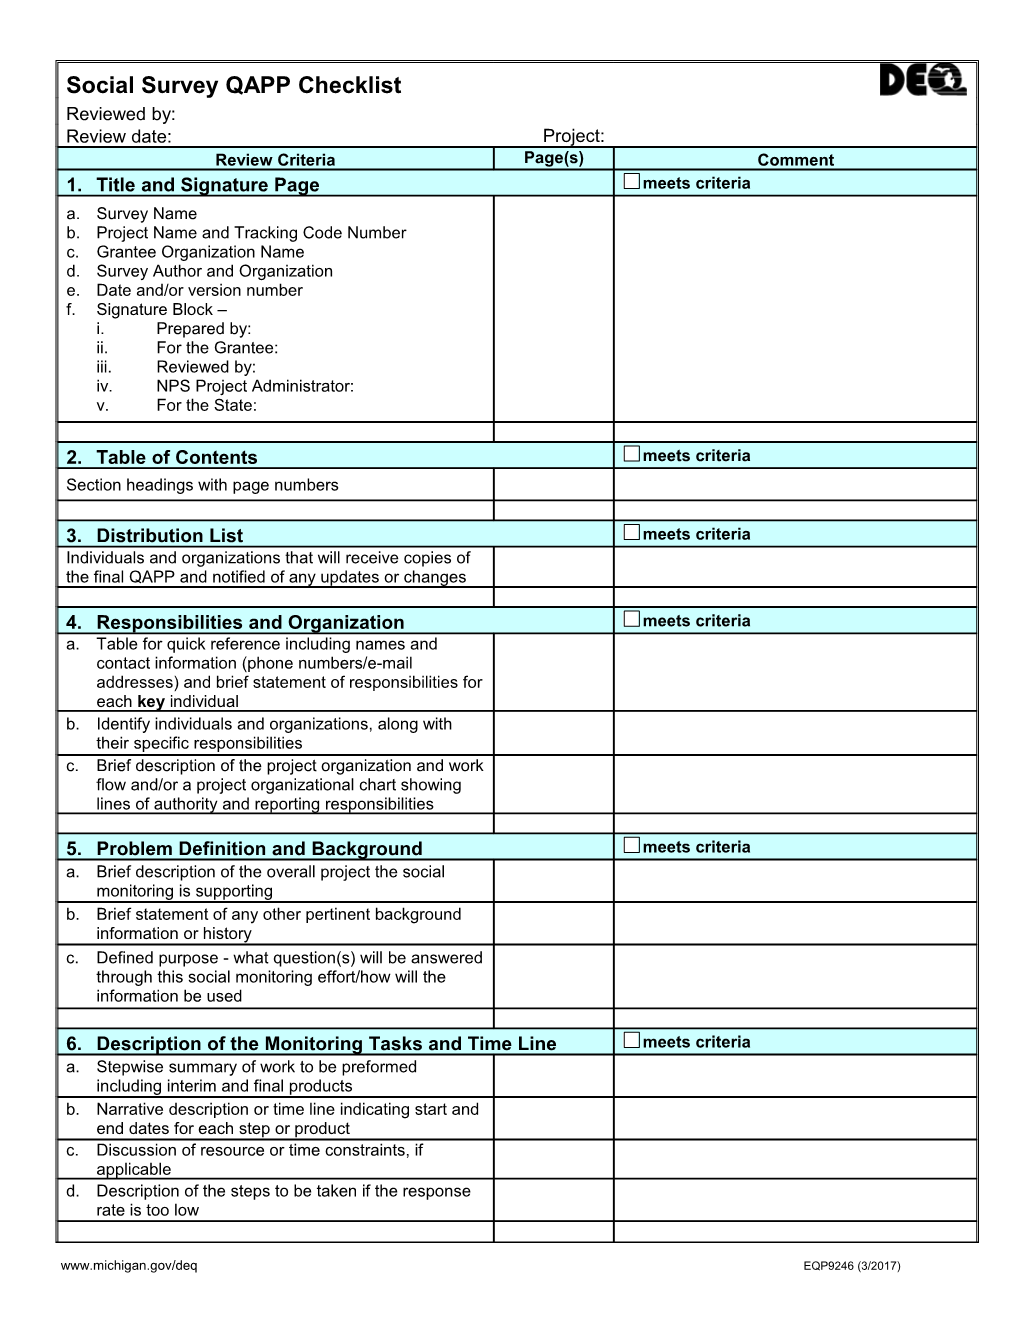 Social Monitoring Quality Assurance Project Plan Checklist